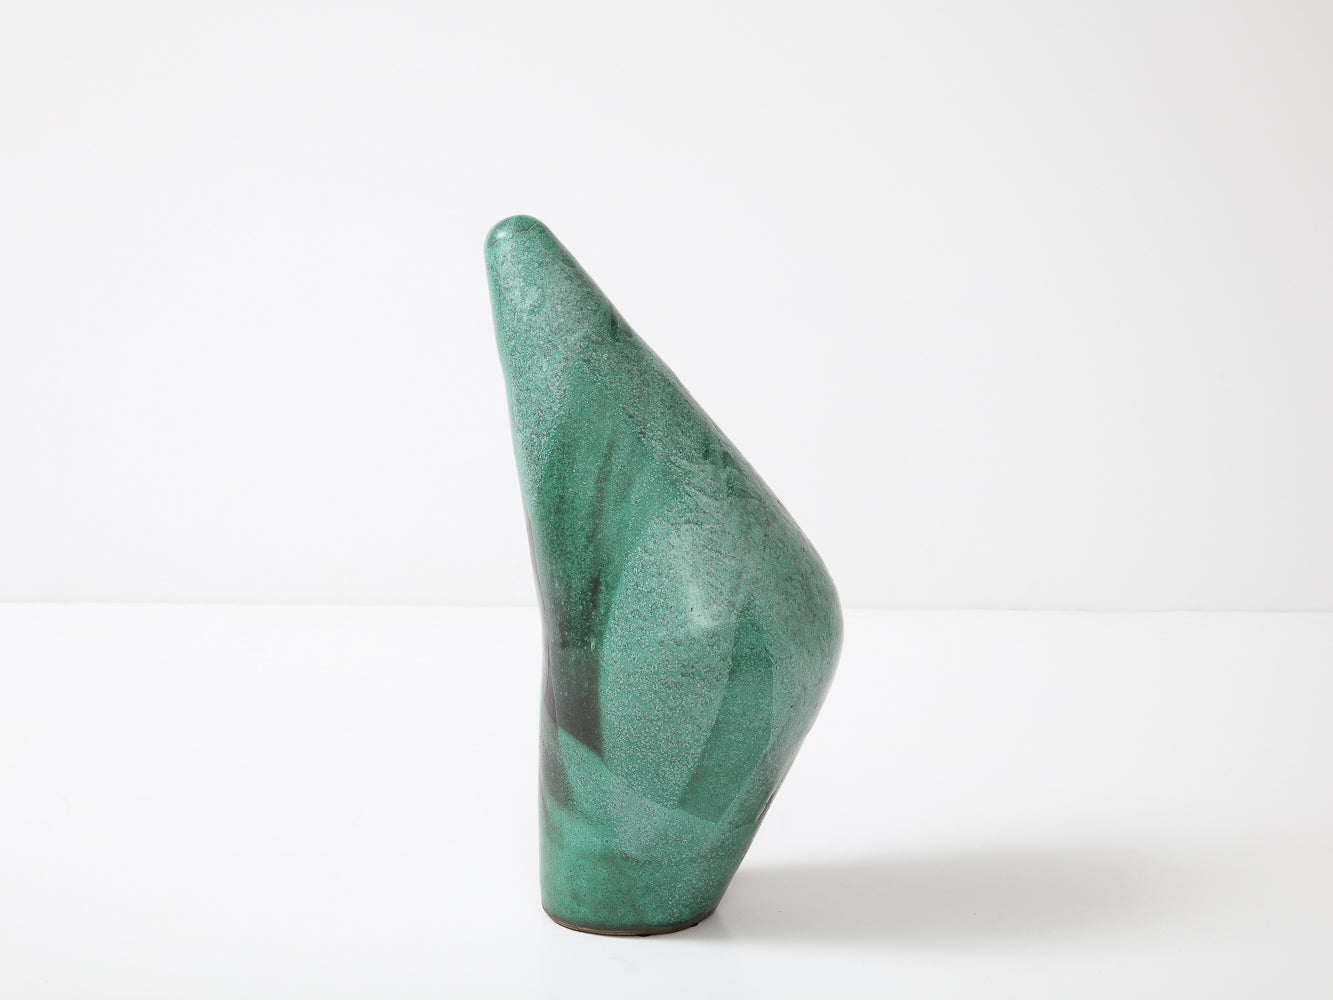 Untitled Elbow Sculpture #3 by David Haskell